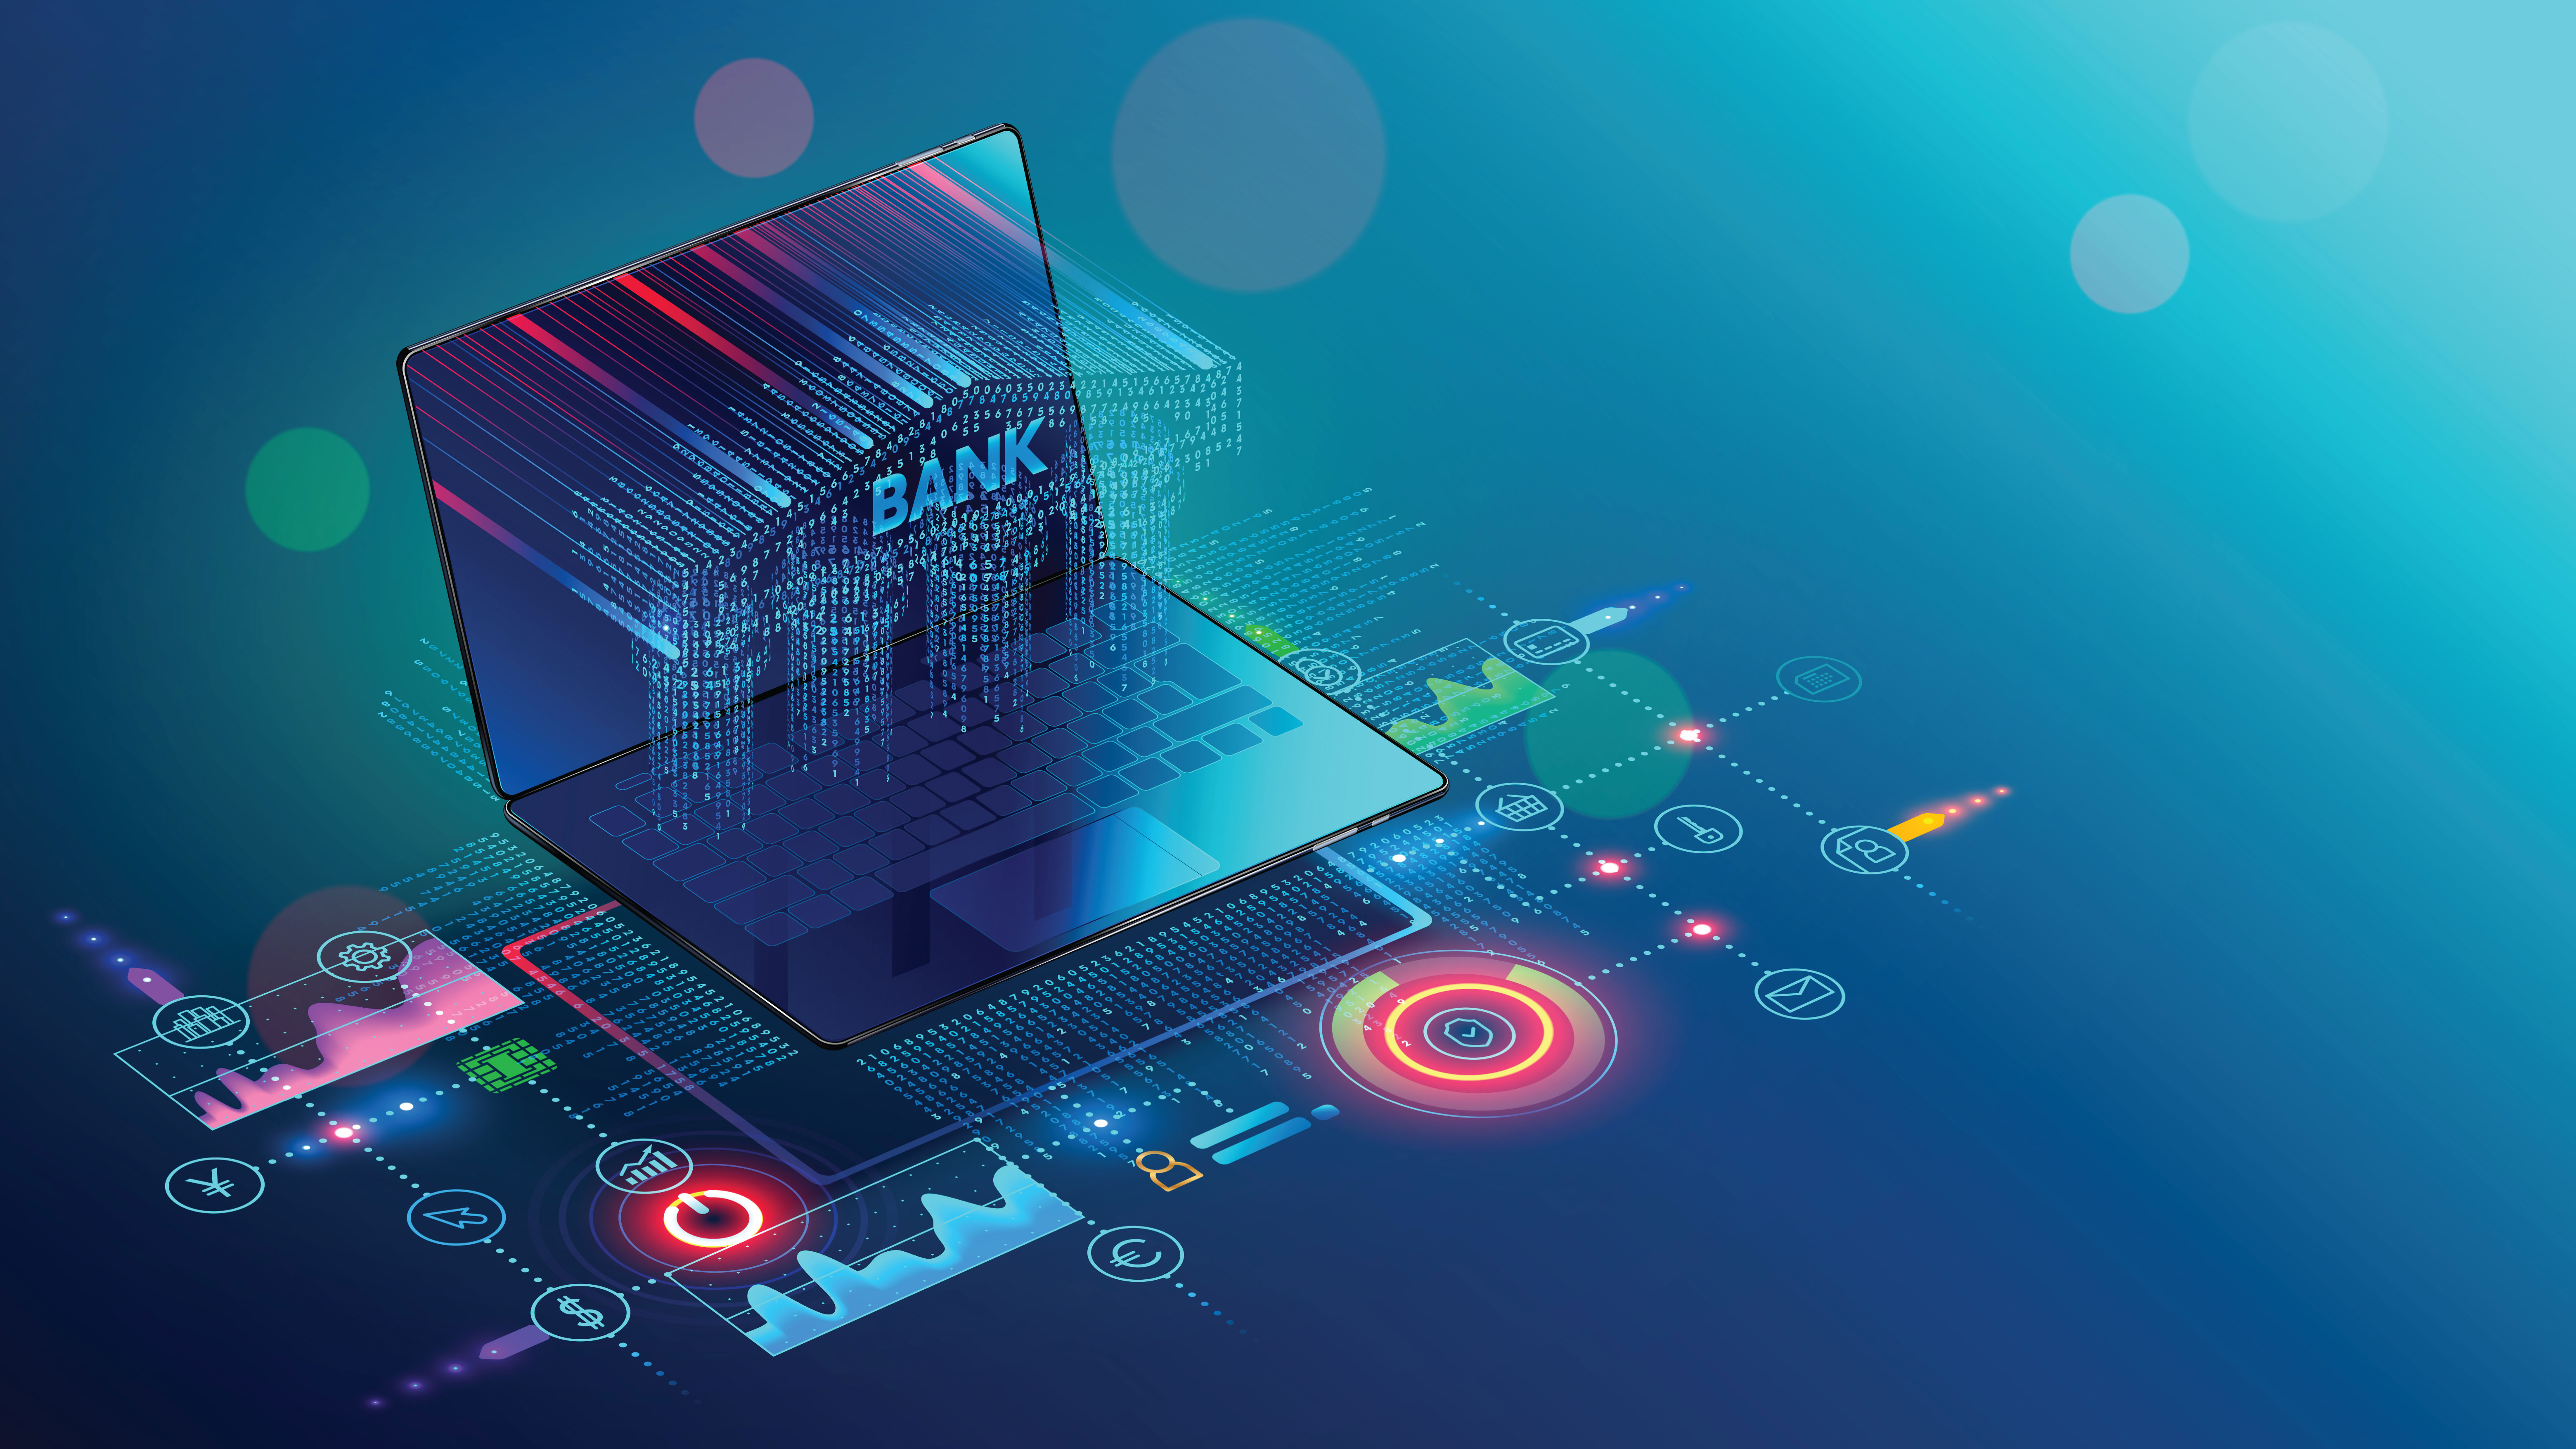 A stock image of a bank alongside stock and analytics graphics